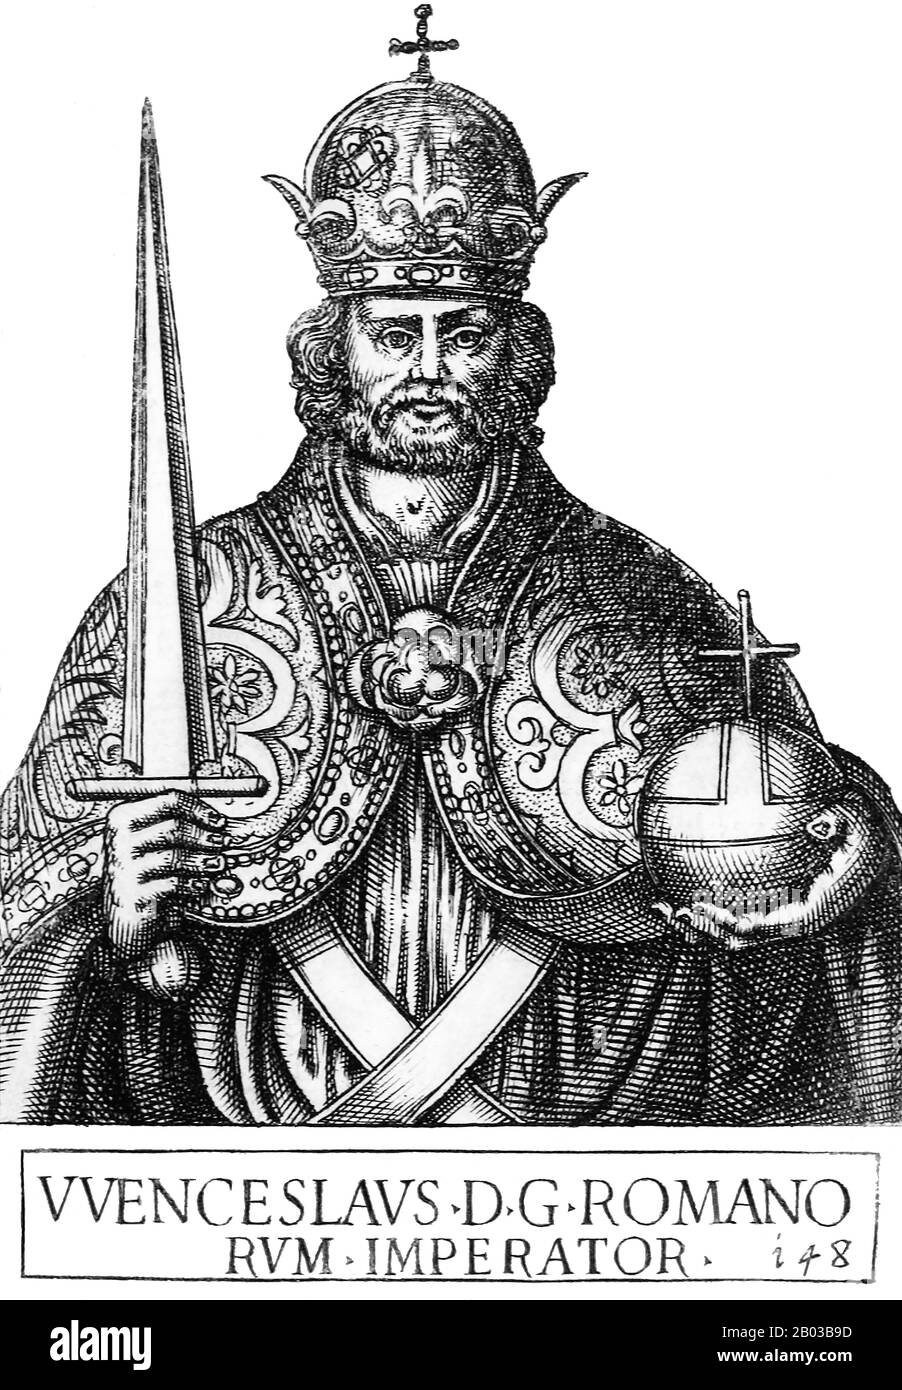 Wenceslaus IV (1361-1419), also known as Wenceslaus of Bohemia and Wenceslaus the Idle, was the son of Emperor Charles IV and became King of Bohemia in 1363, aged only two. He was elected as King of Germany in 1376 by the actions of his father, who passed away in 1378, making Wenceslaus sole ruler of Bohemia and the Holy Roman Empire. Stock Photo